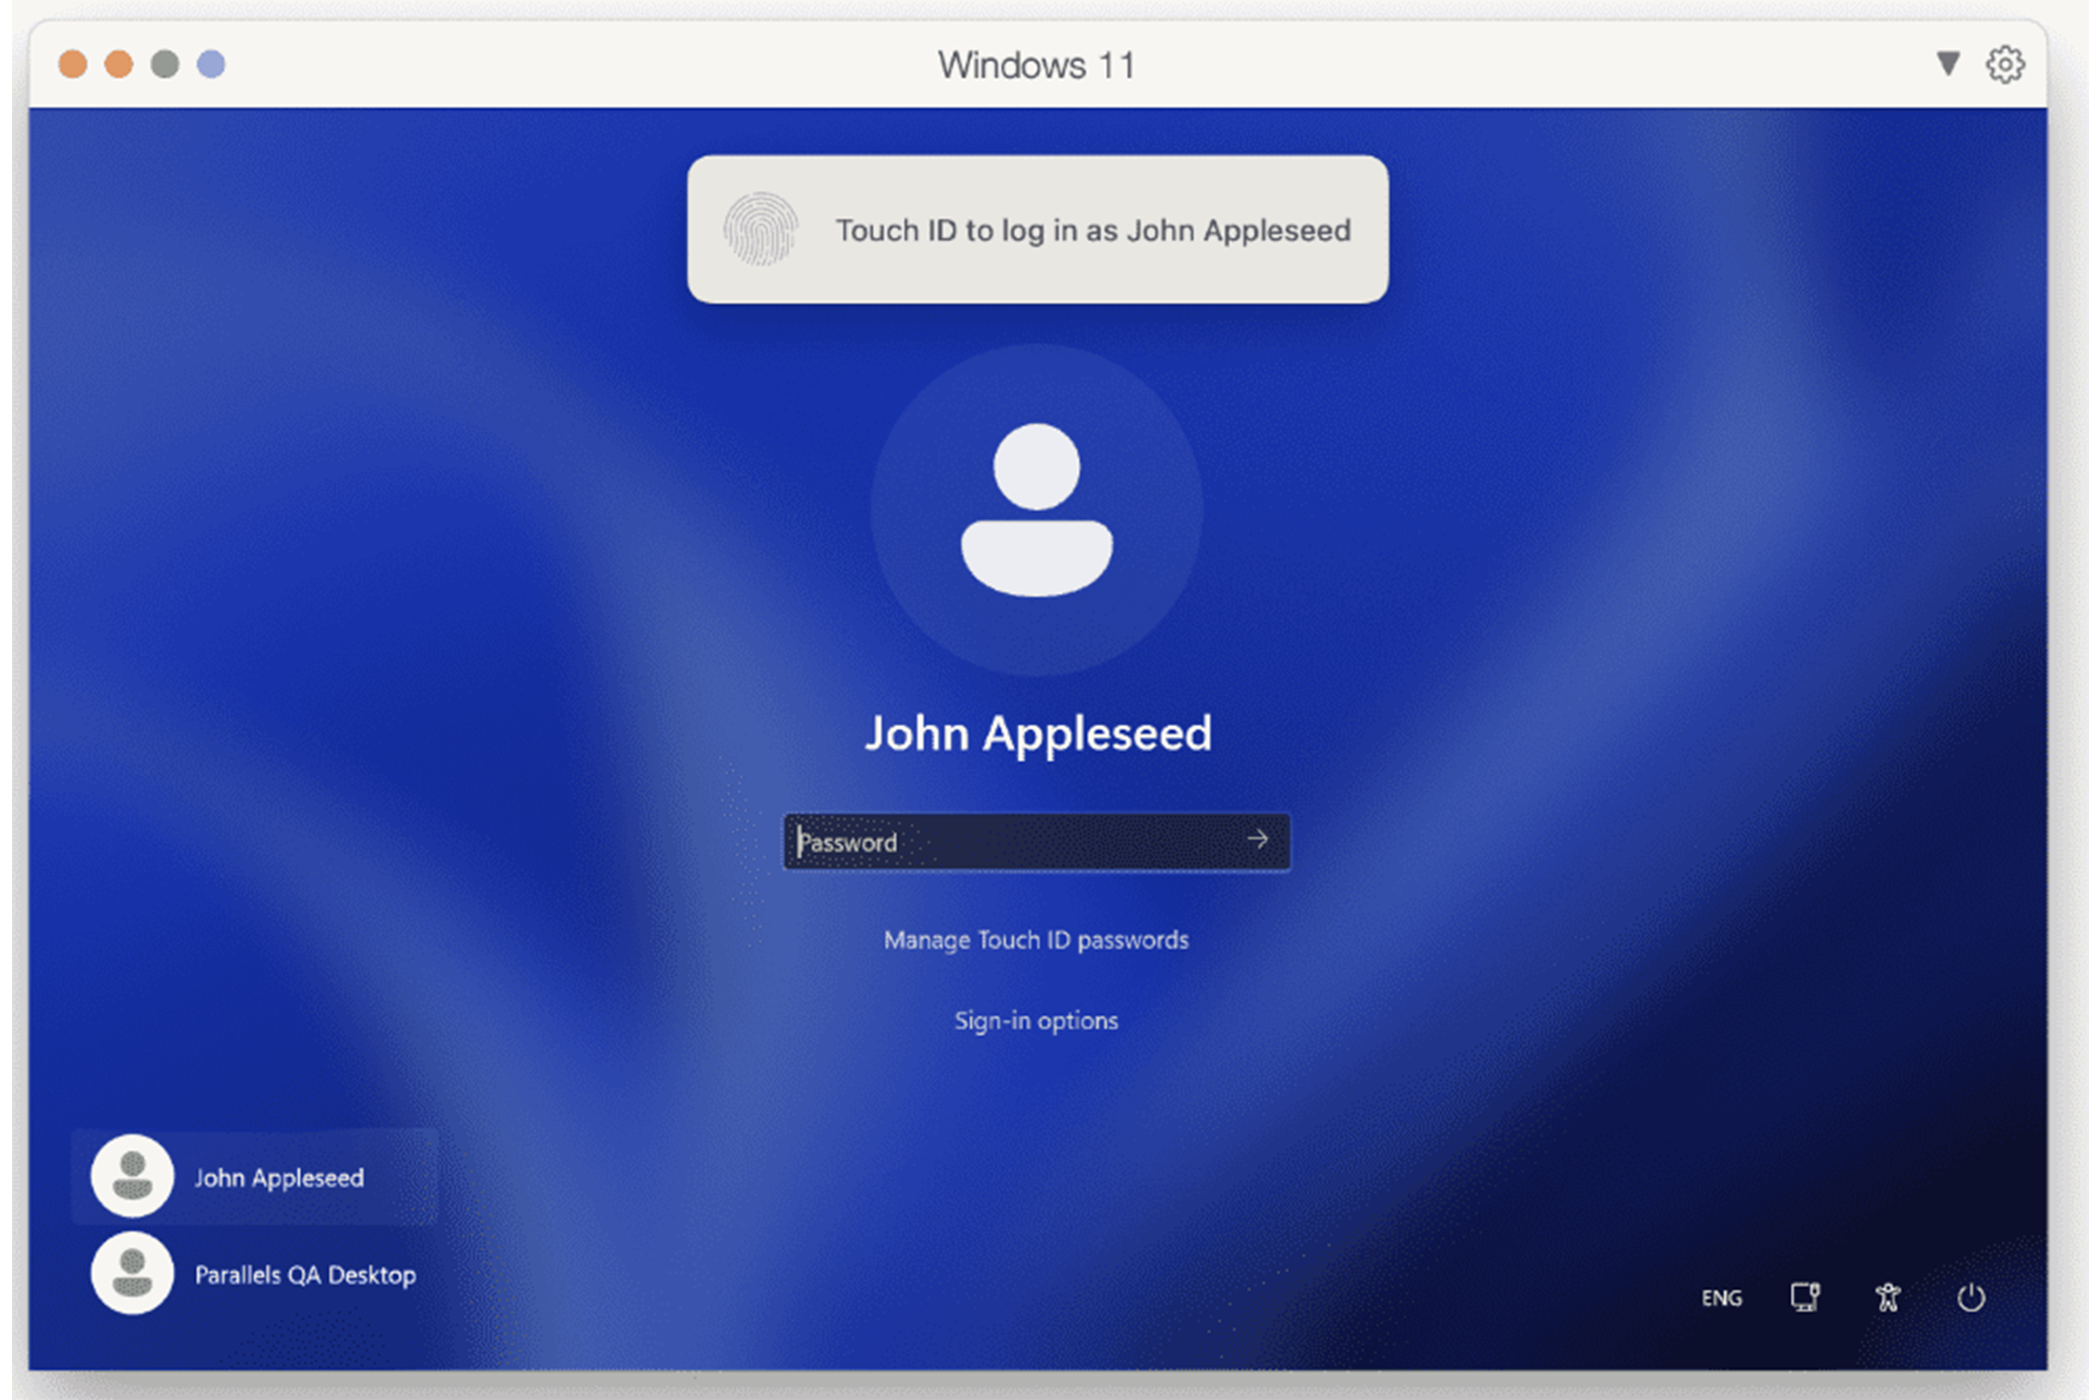 Logging into Windows with Touch ID on Parallels Desktop 19